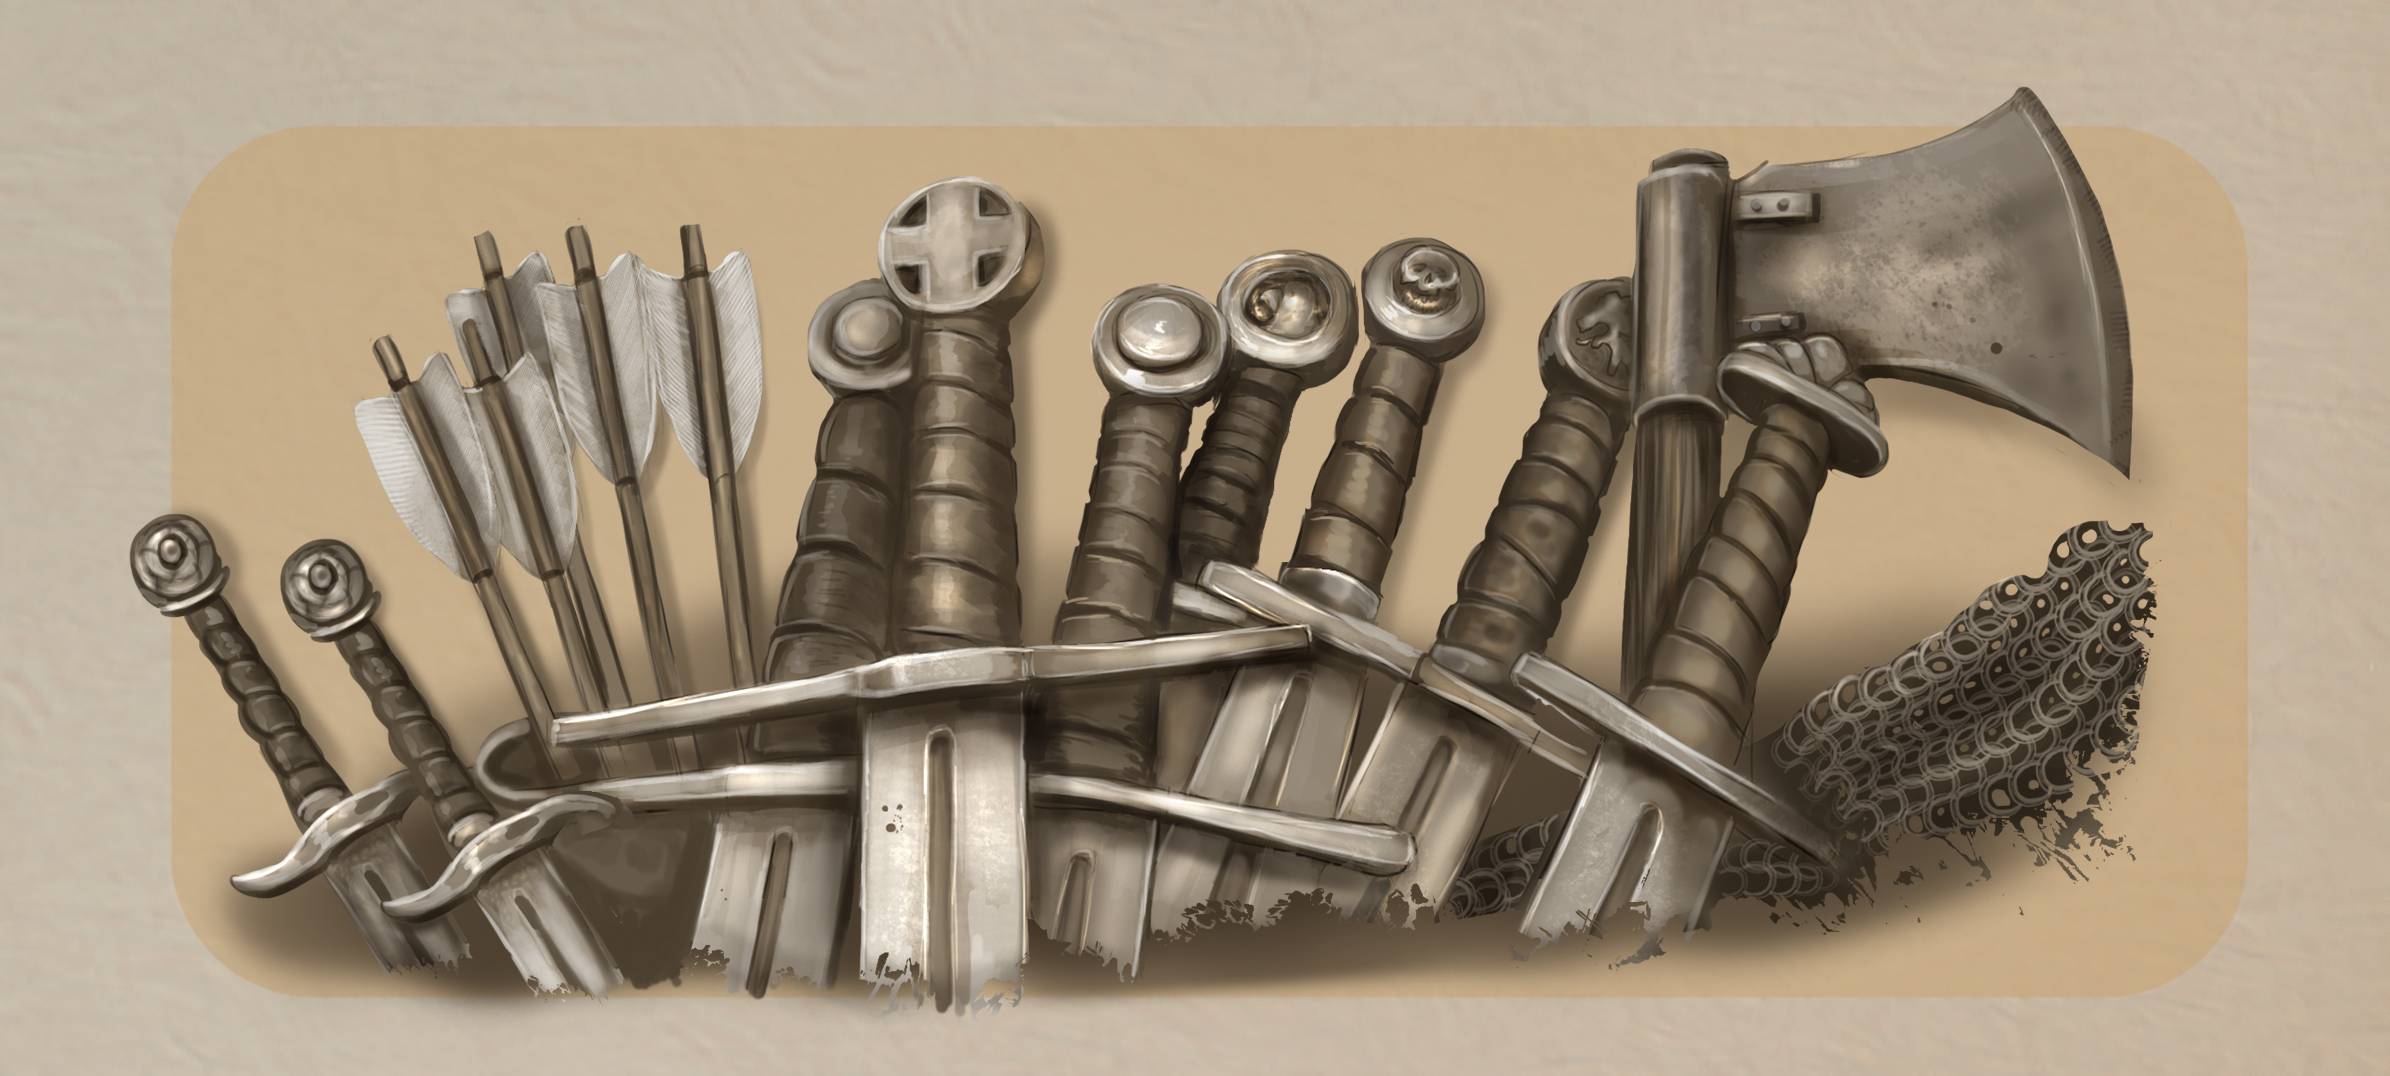 fantasy weapon art, spot art for an upcoming ttrpg called tyrants conquest. featuring acxes, swords daggers and arrows. By The Noble Artist